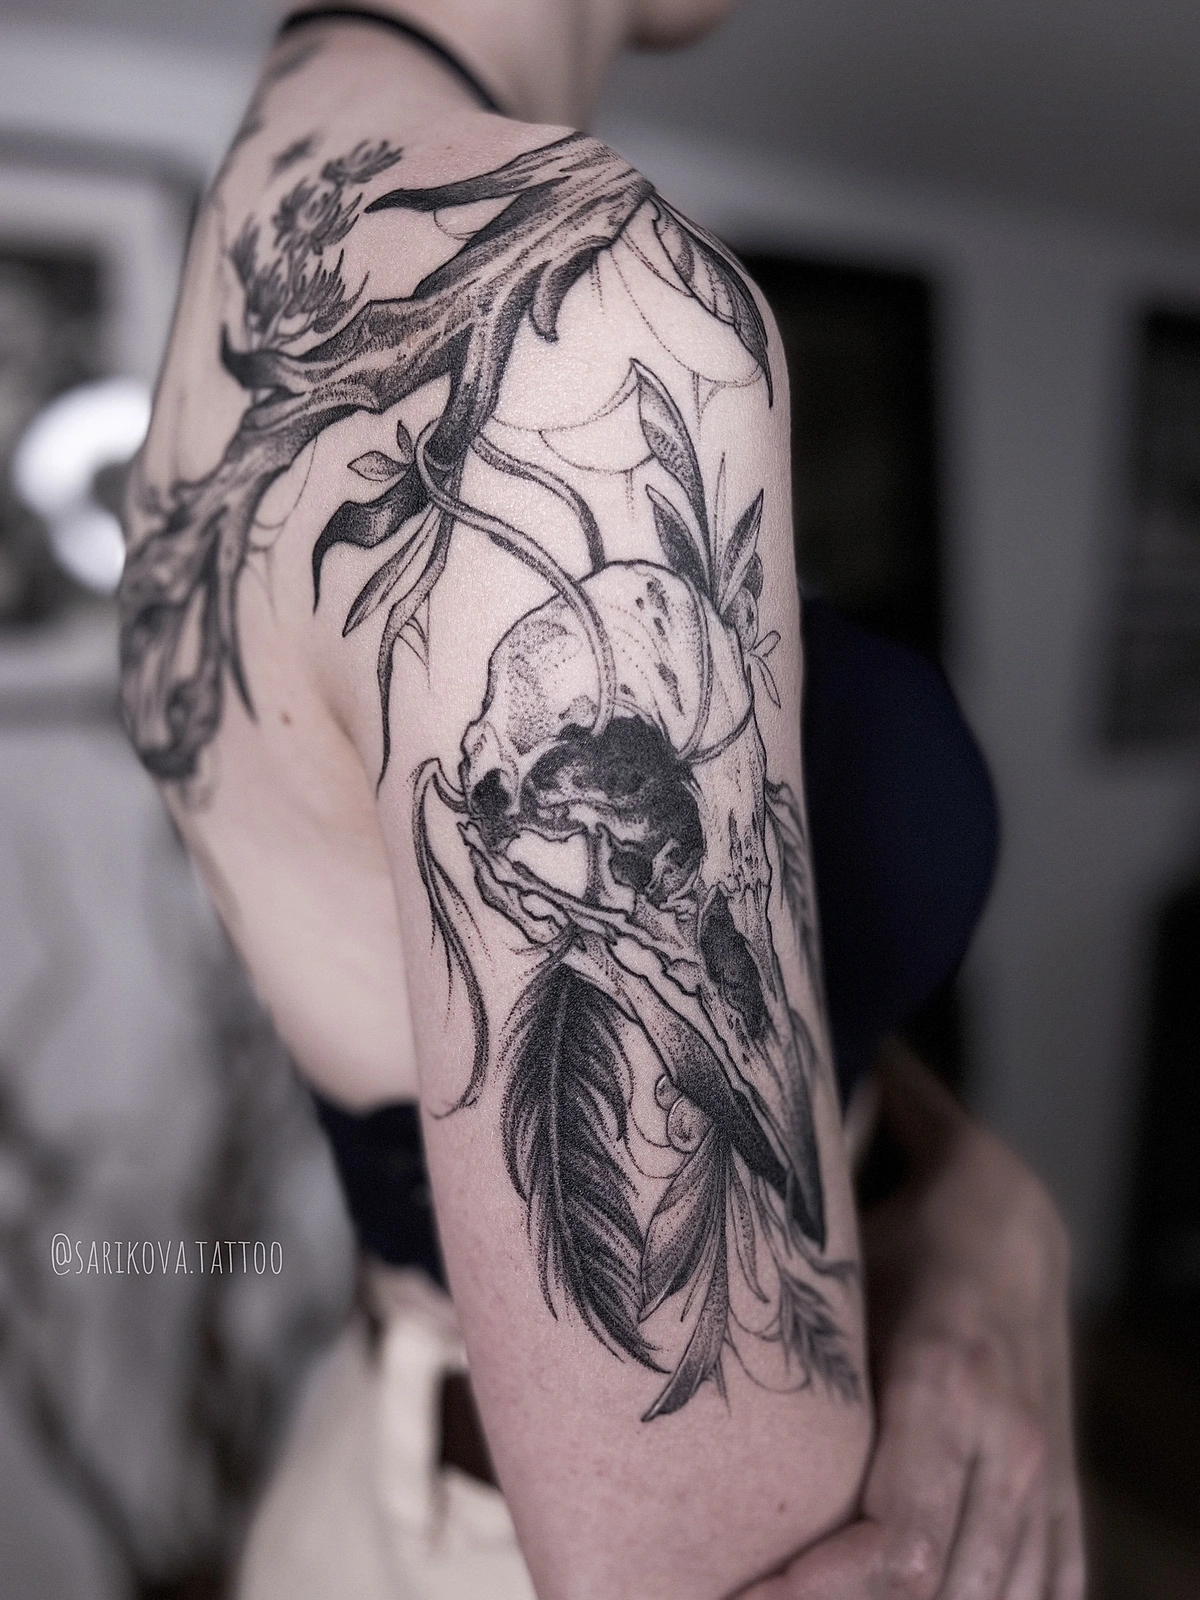 fineline and dotwork tattoo of feathers and natural elements